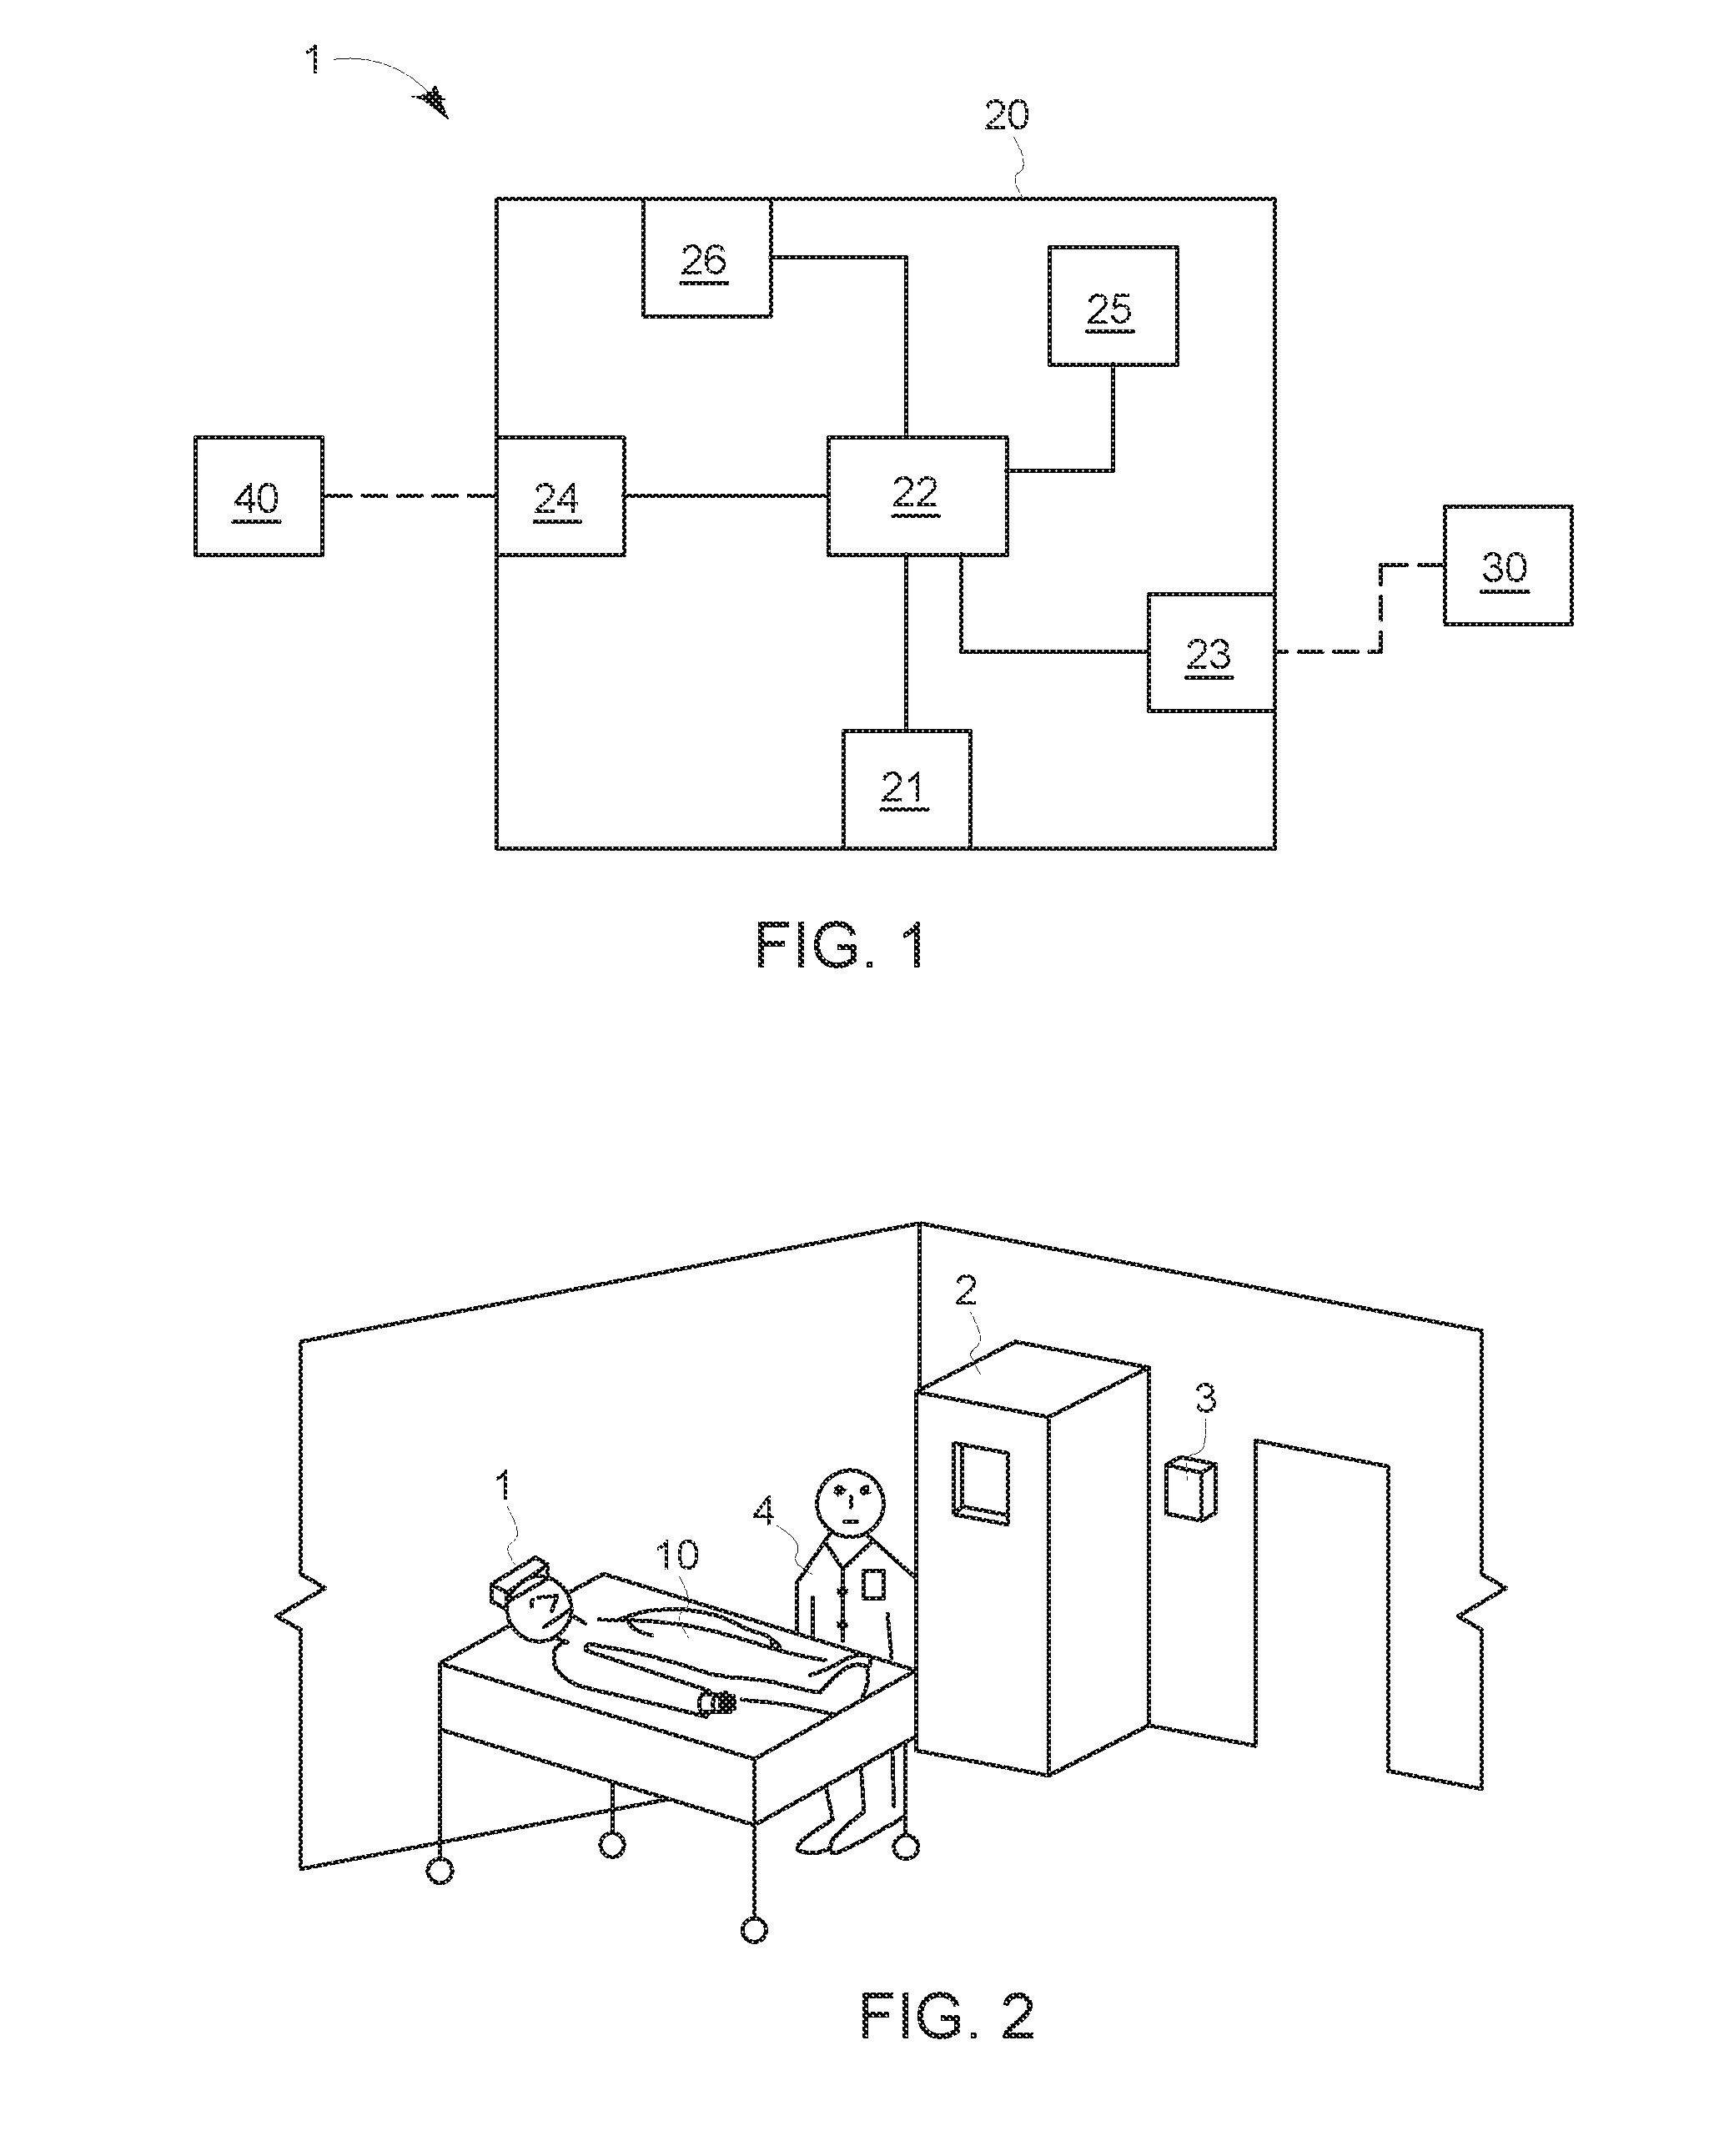 Method and apparatus for measuring physiological parameters